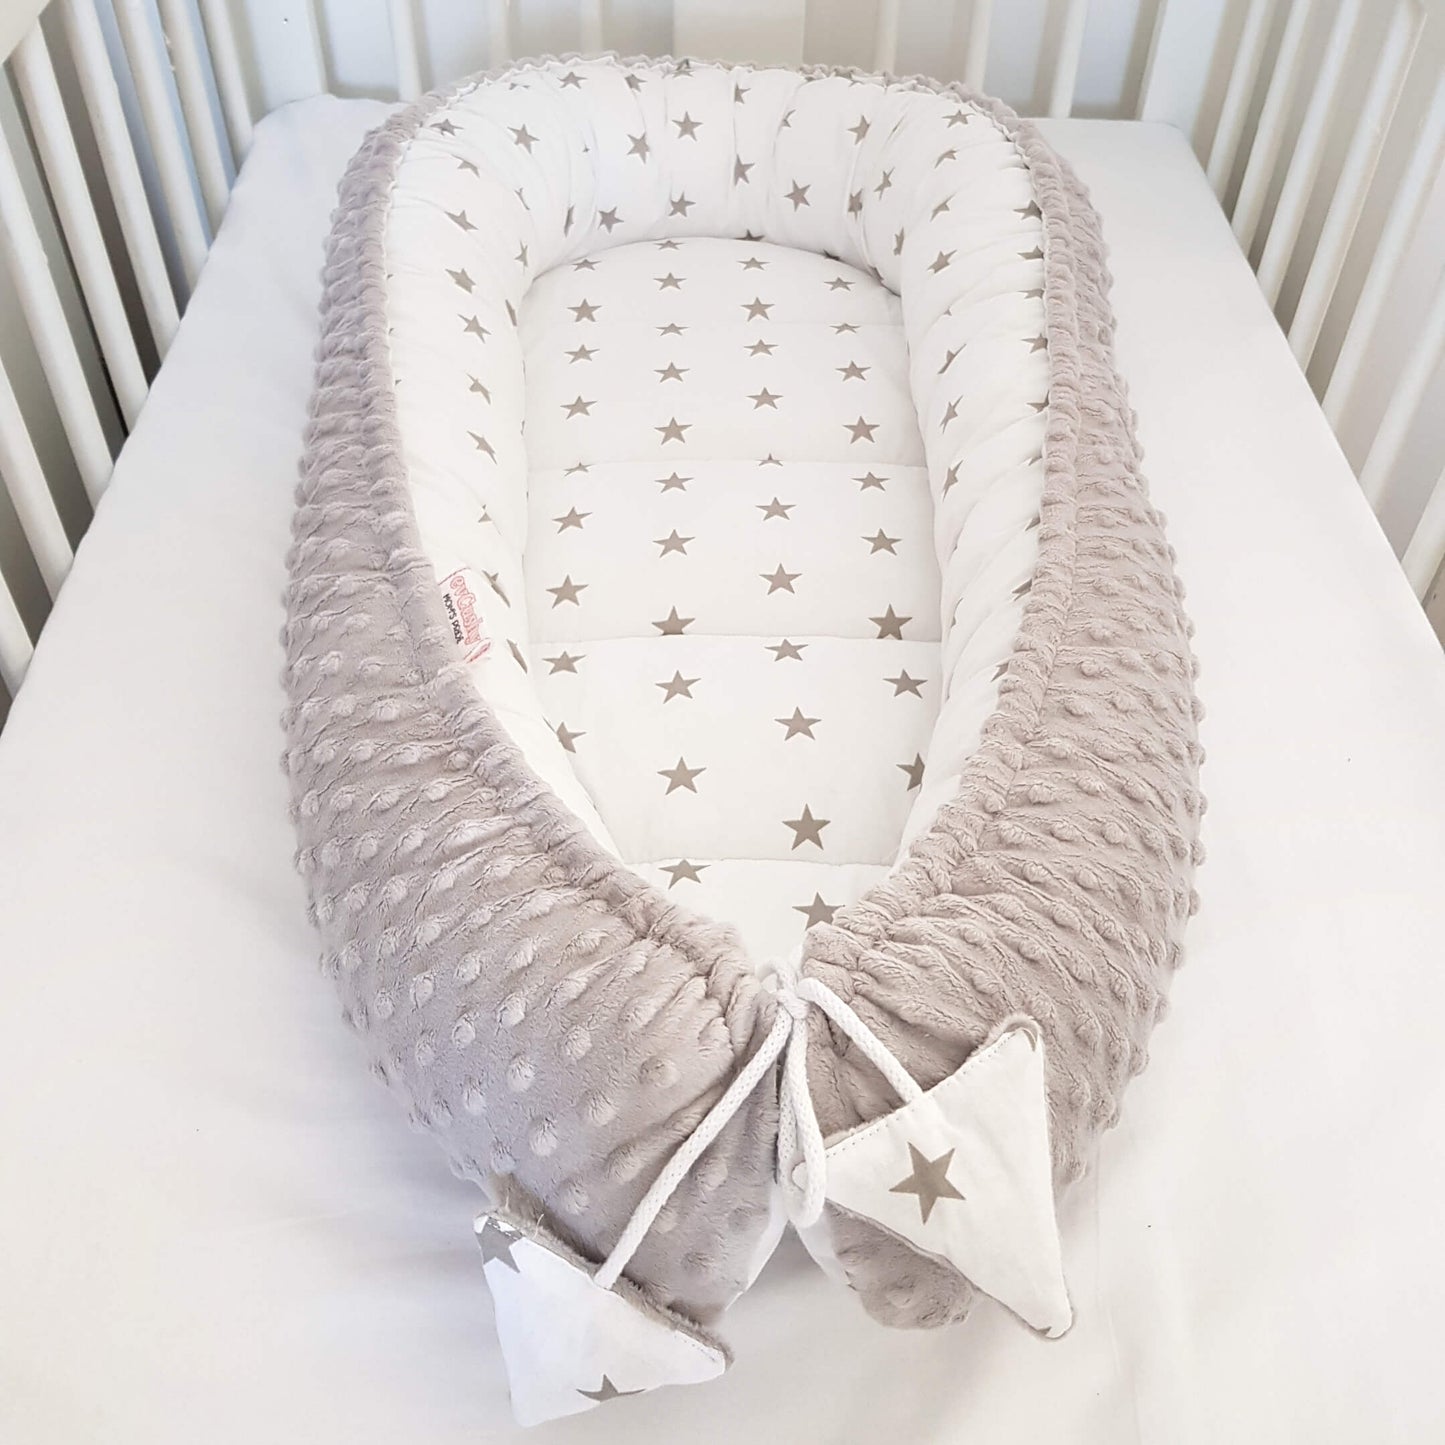 baby nest in Ireland fast delivery free shipping in Ireland